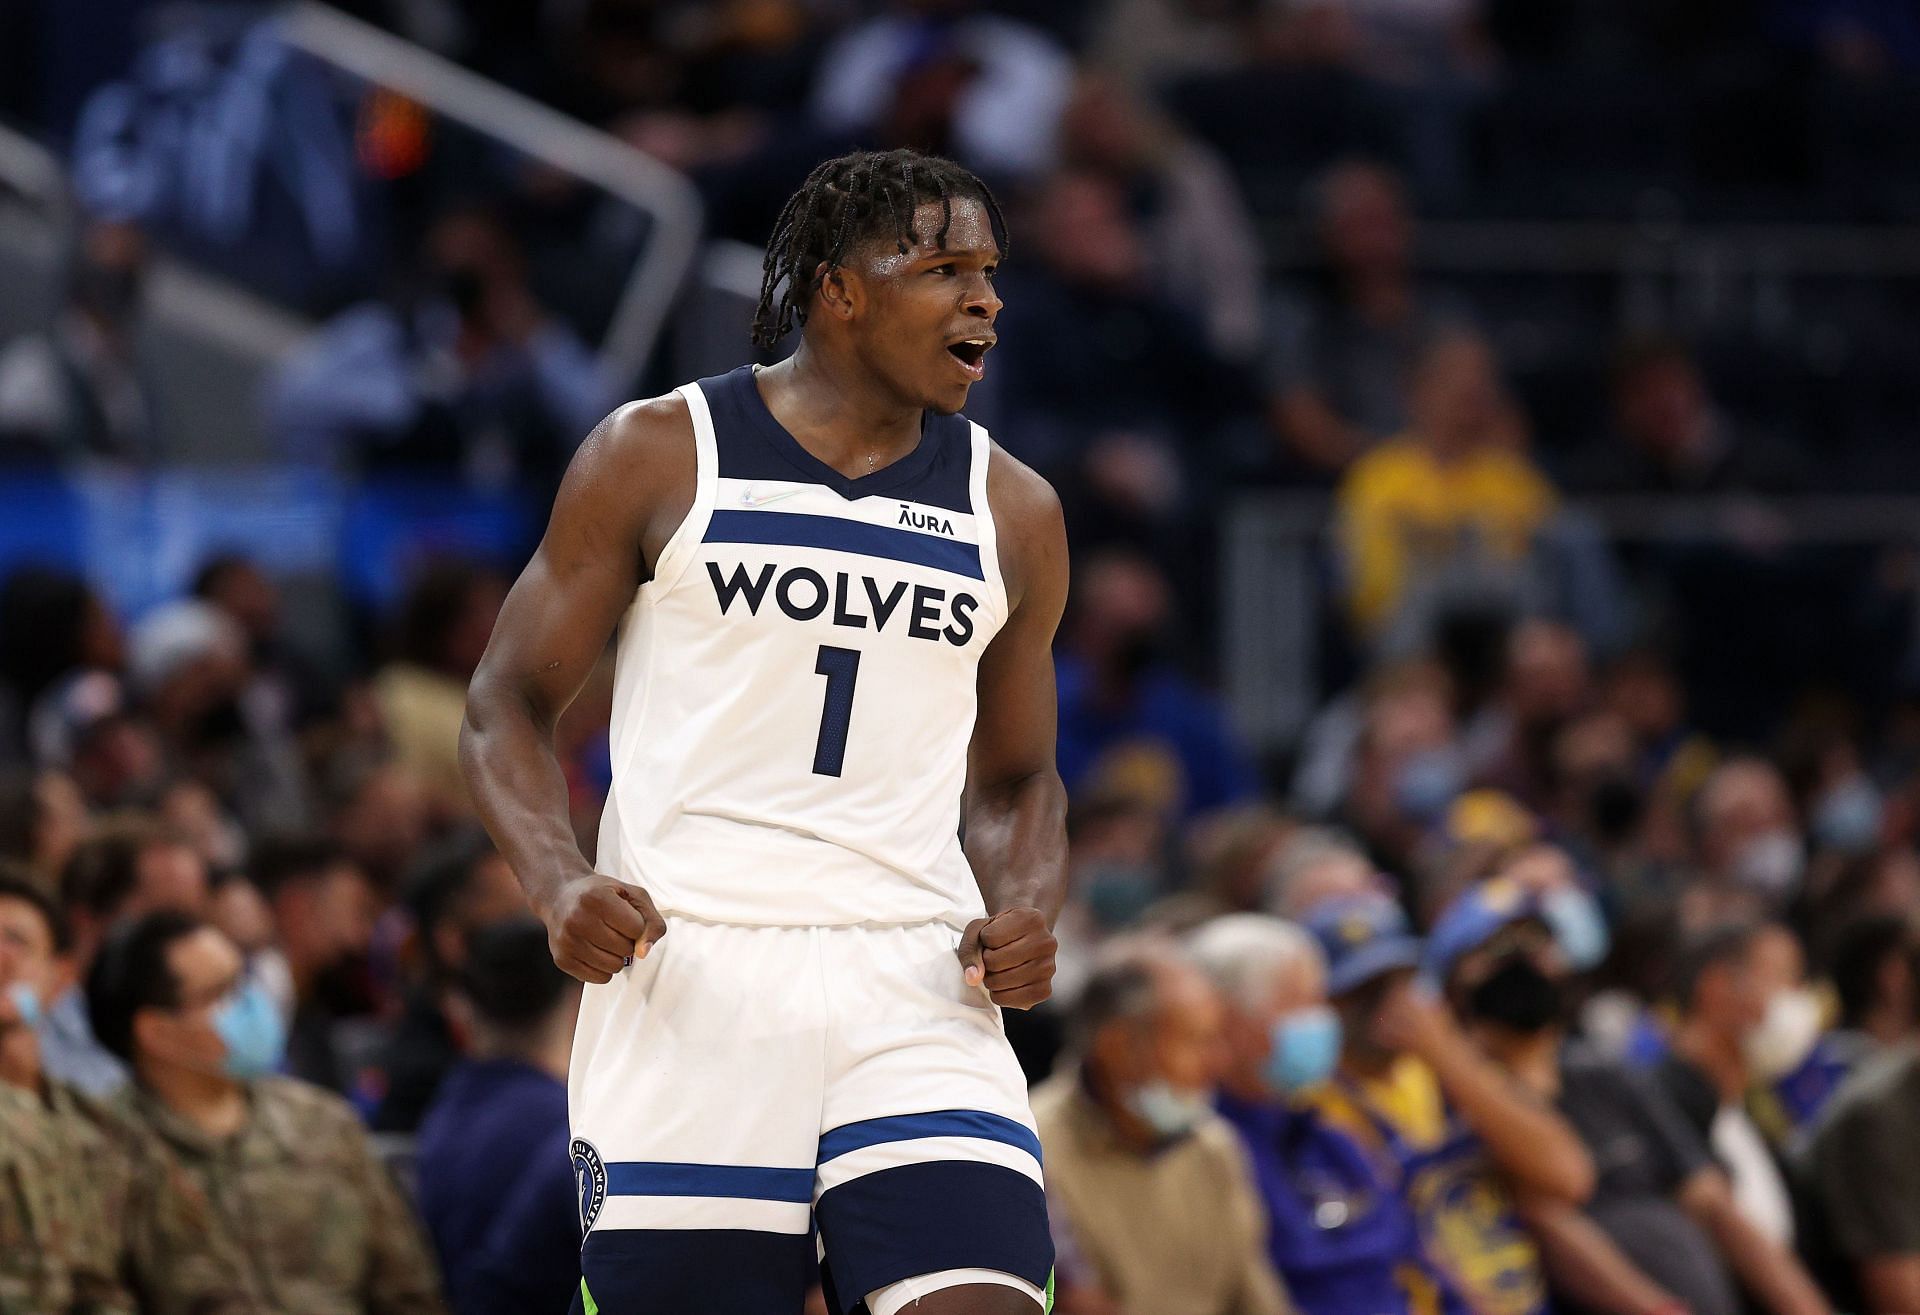 Anthony Edwards #1 of the Minnesota Timberwolves reacts after making a three point basket against the Golden State Warriors at Chase Center on November 10, 2021 in San Francisco, California.